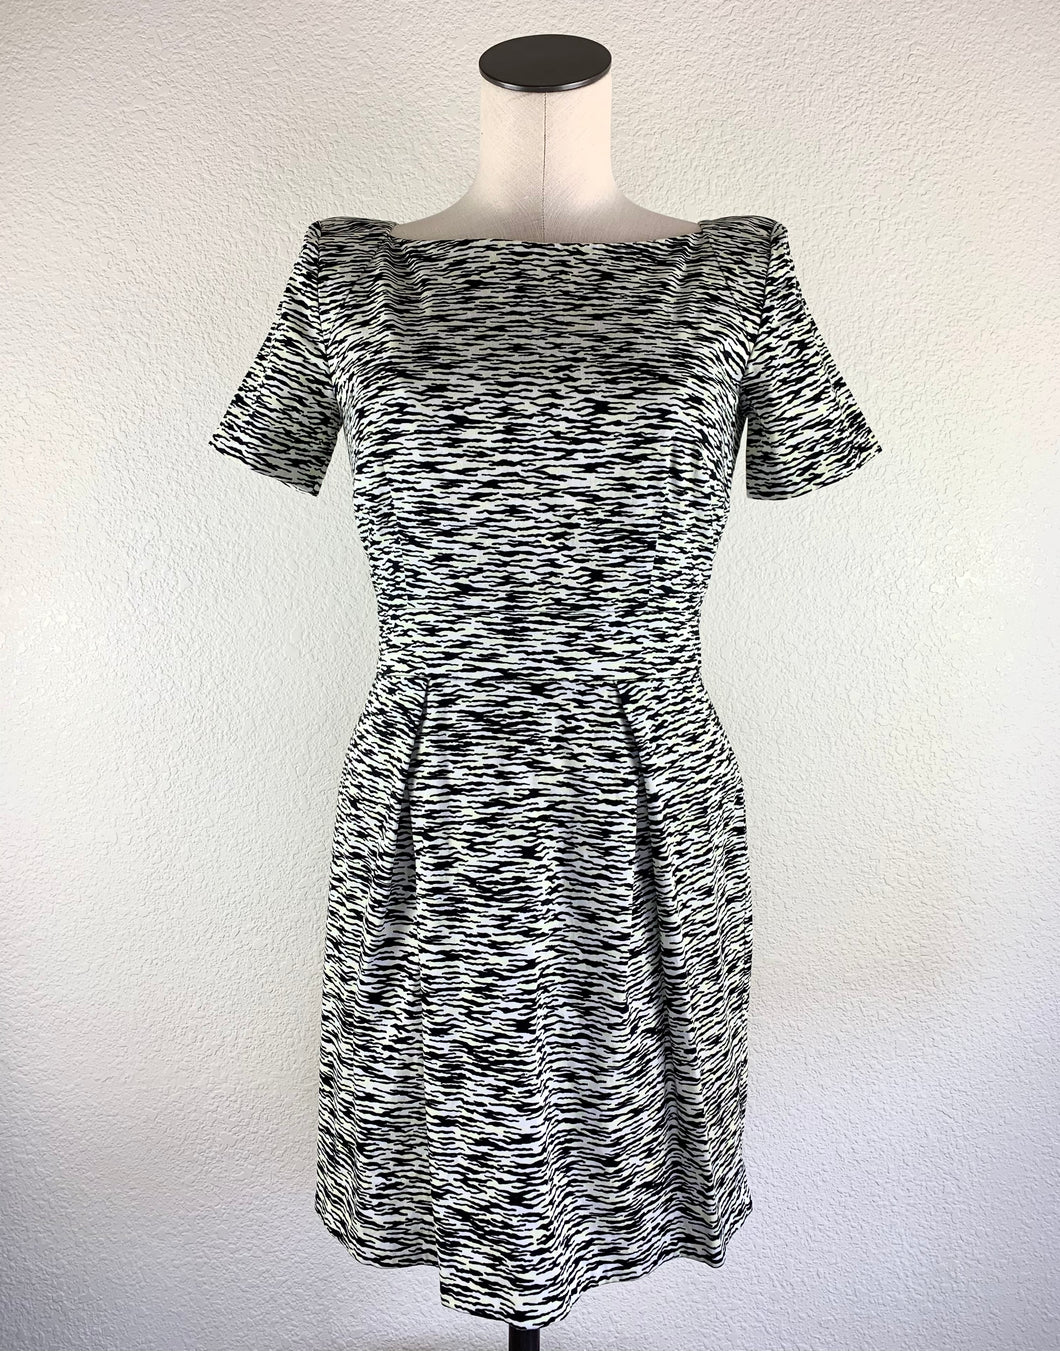 French Connection Printed Dress size 6